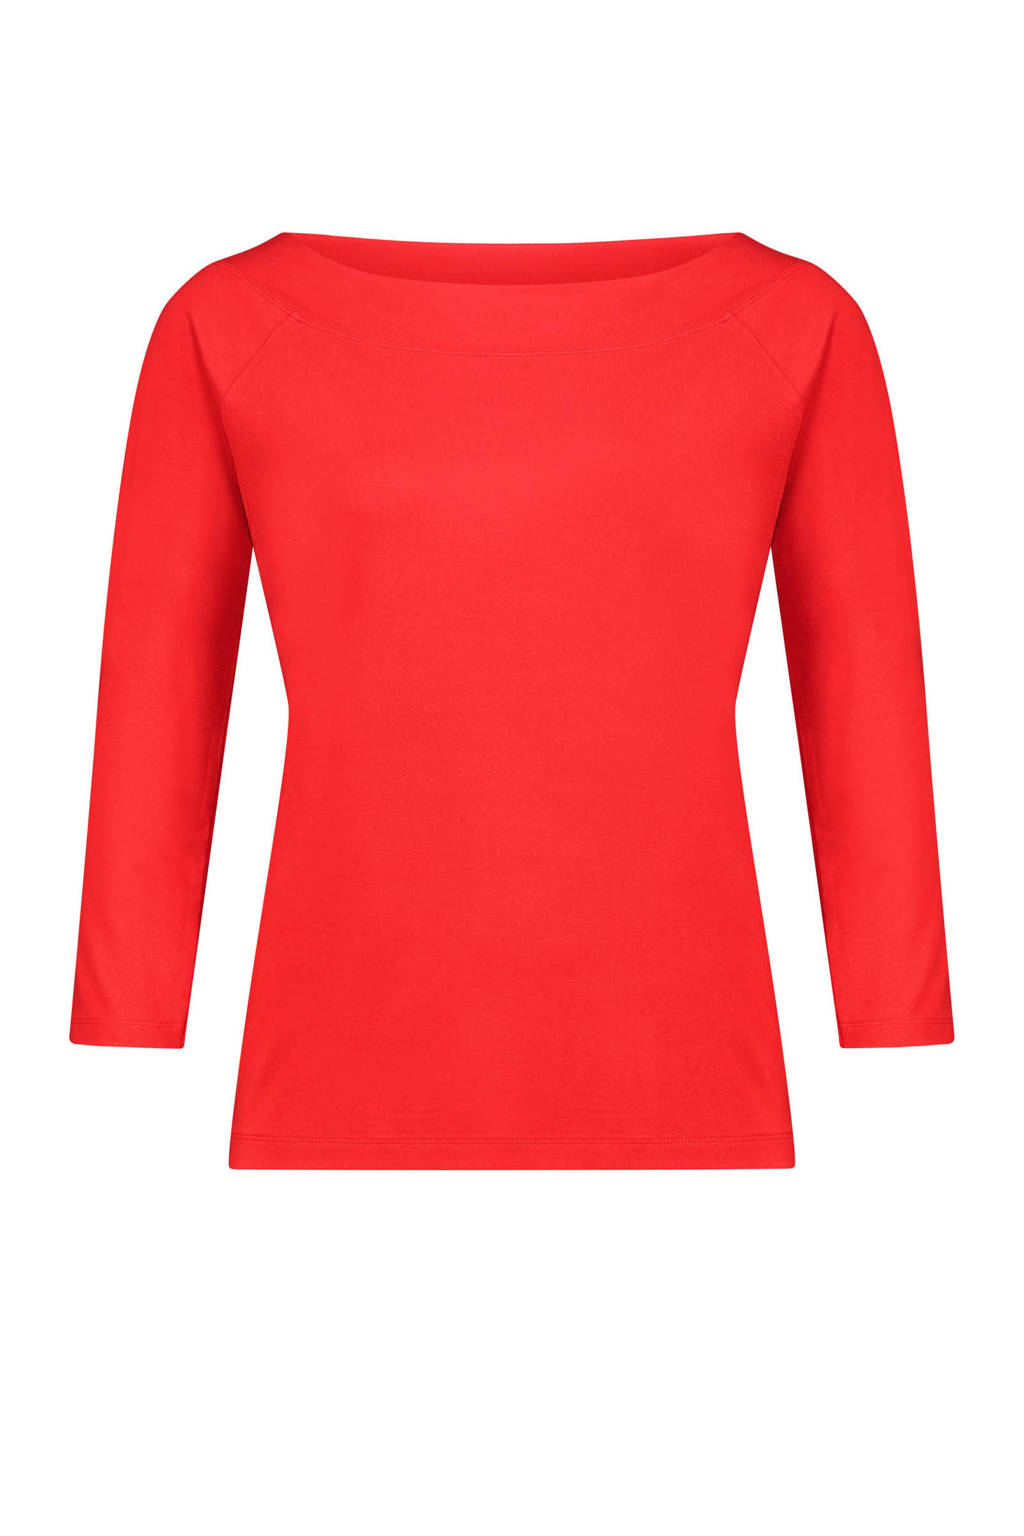 Claudia Sträter jersey boothals top 3/4 mouw rood